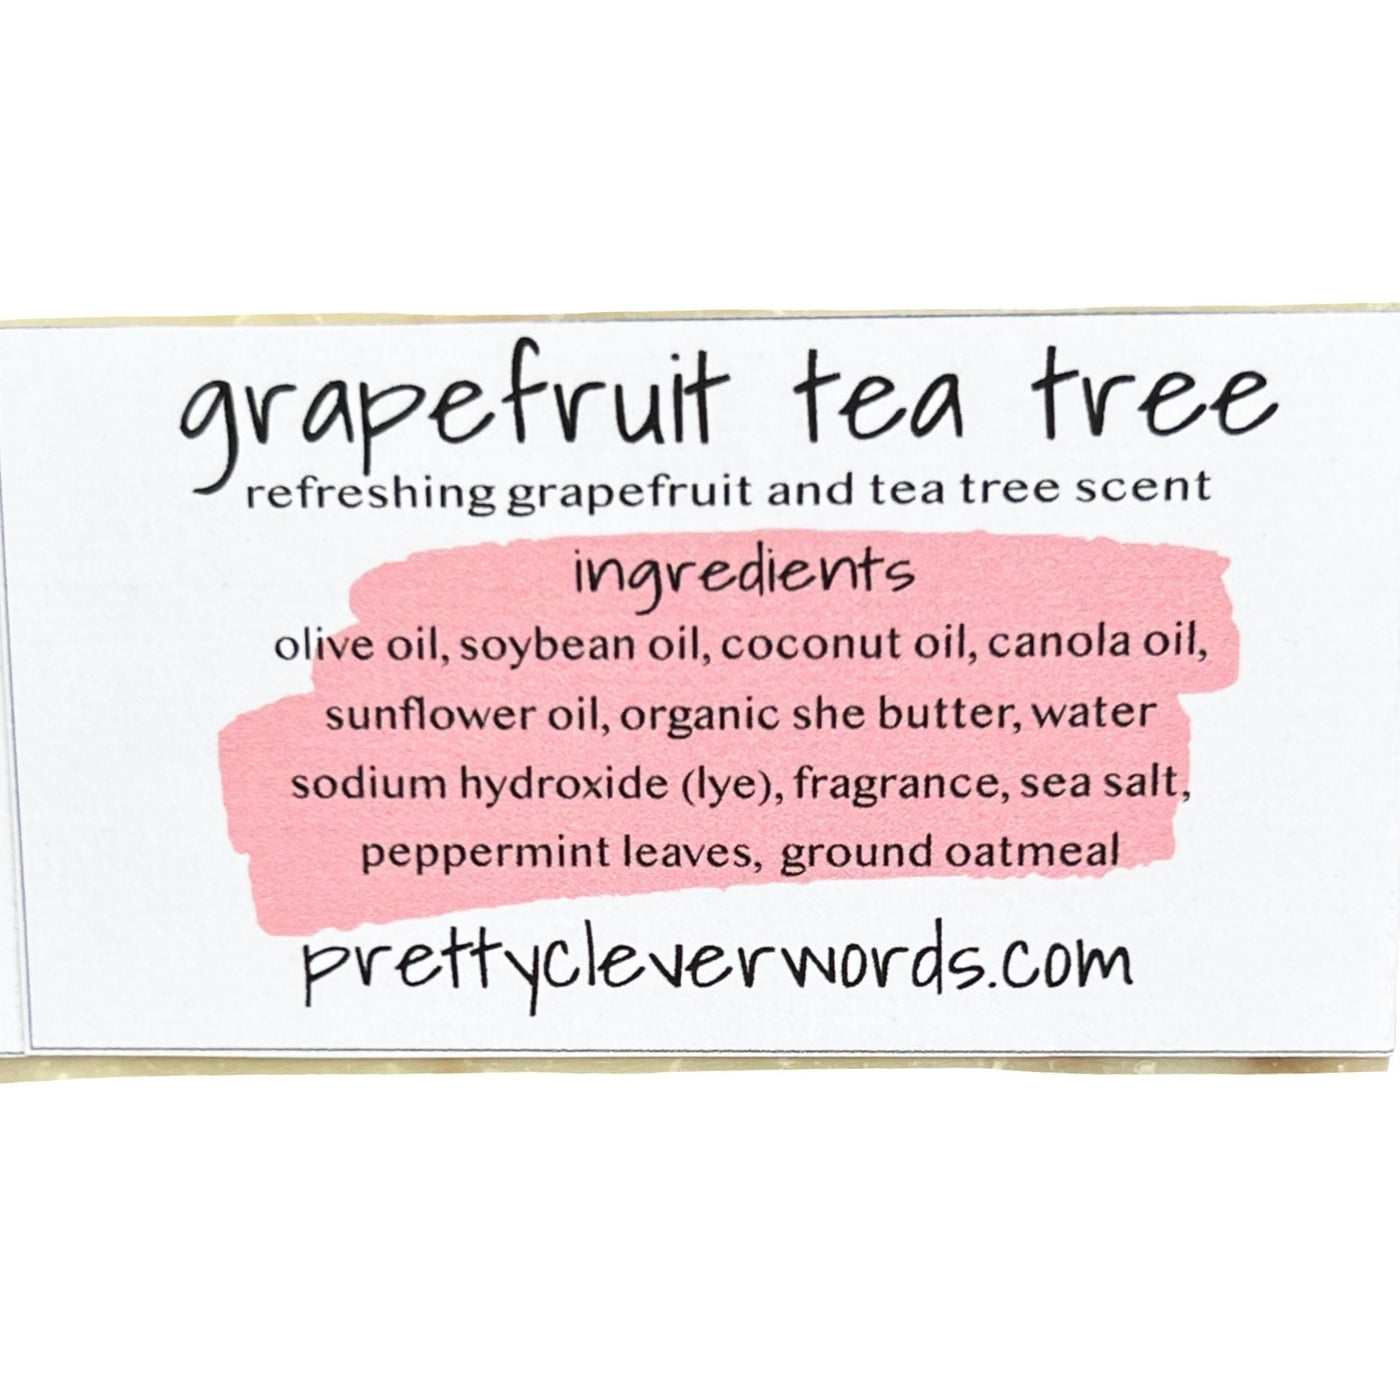 clever+clean grapefruit tea tree bar soap - sounds like a bad idea, what time?